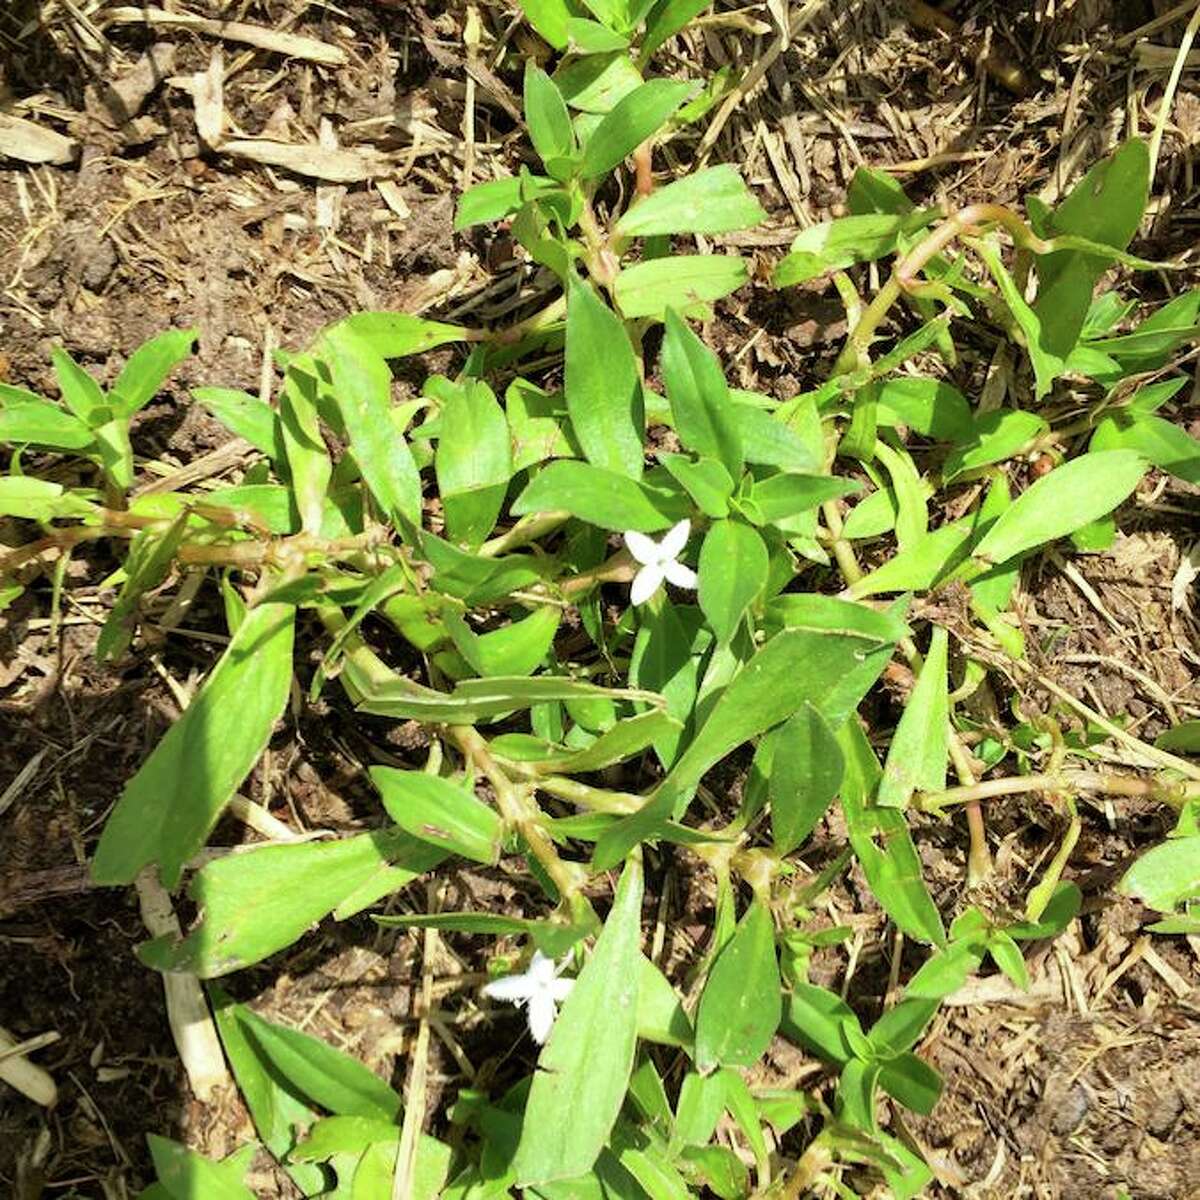 This is Virginia buttonweed, and it's very difficult to eradicate. It's a broadleafed weed, so use a broadleafed weedkiller applied very carefully to it by spot-treating with a hand sprayer.